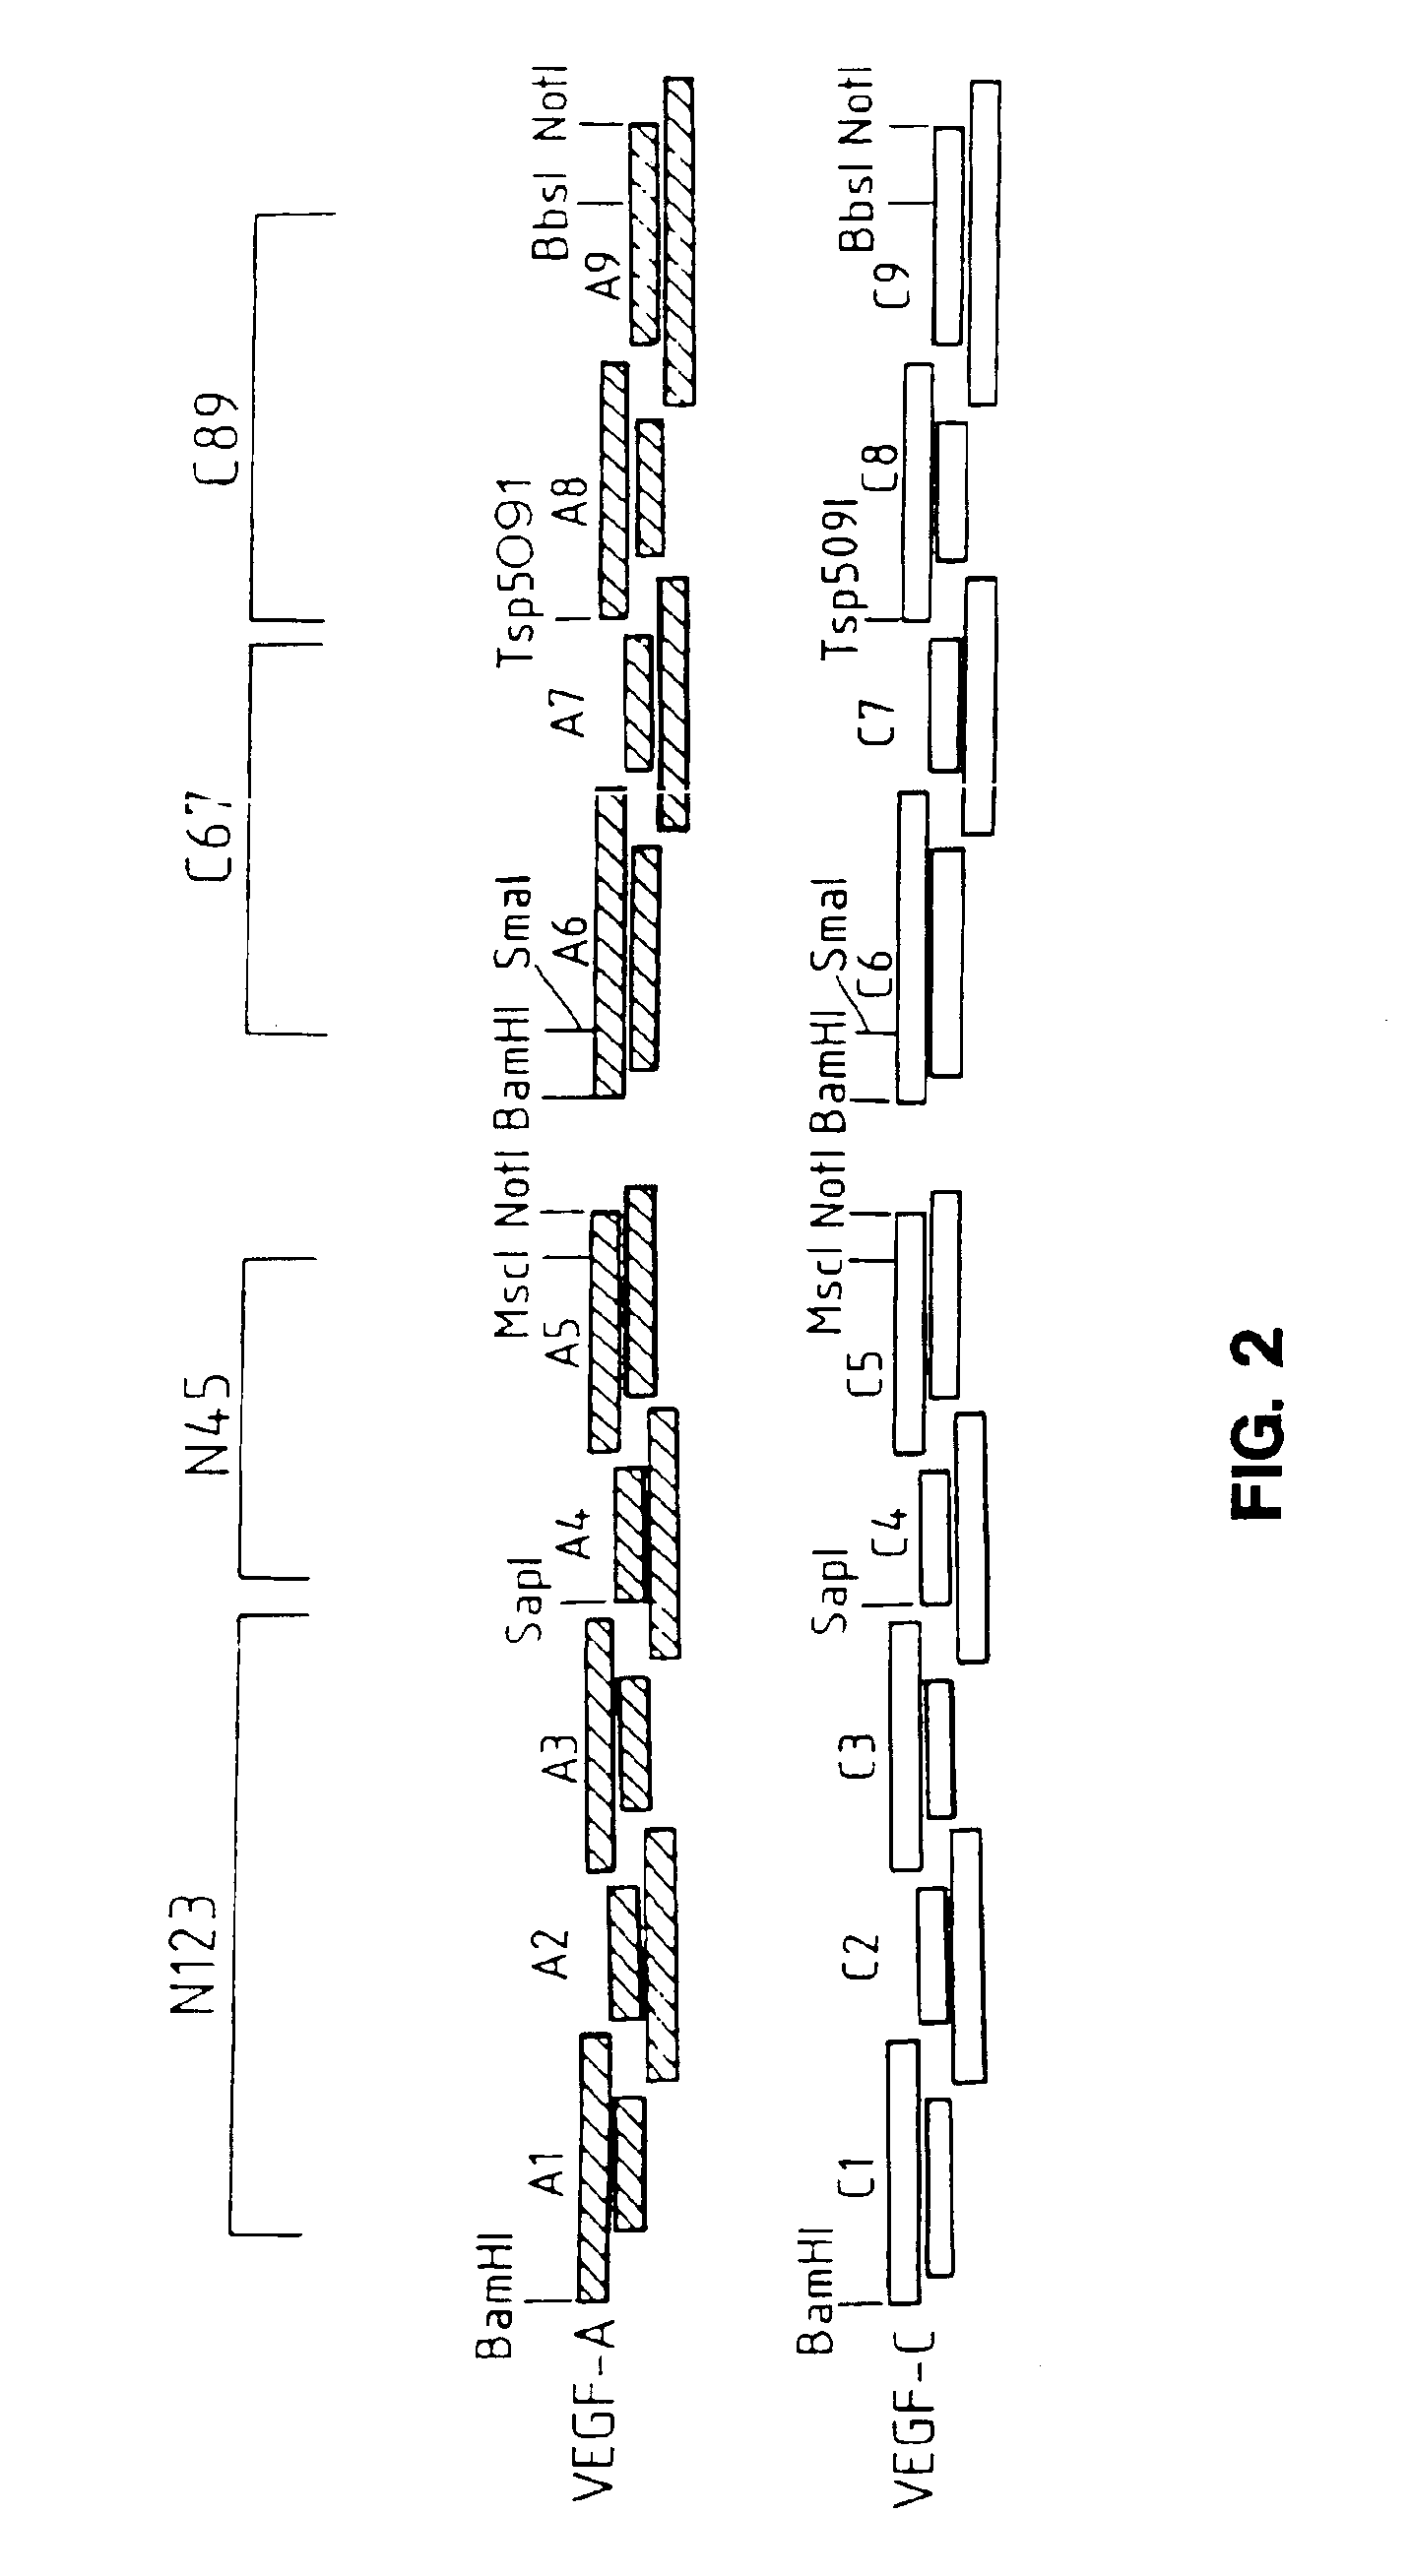 Materials and methods involving hybrid vascular endothelial growth factor DNAs and proteins